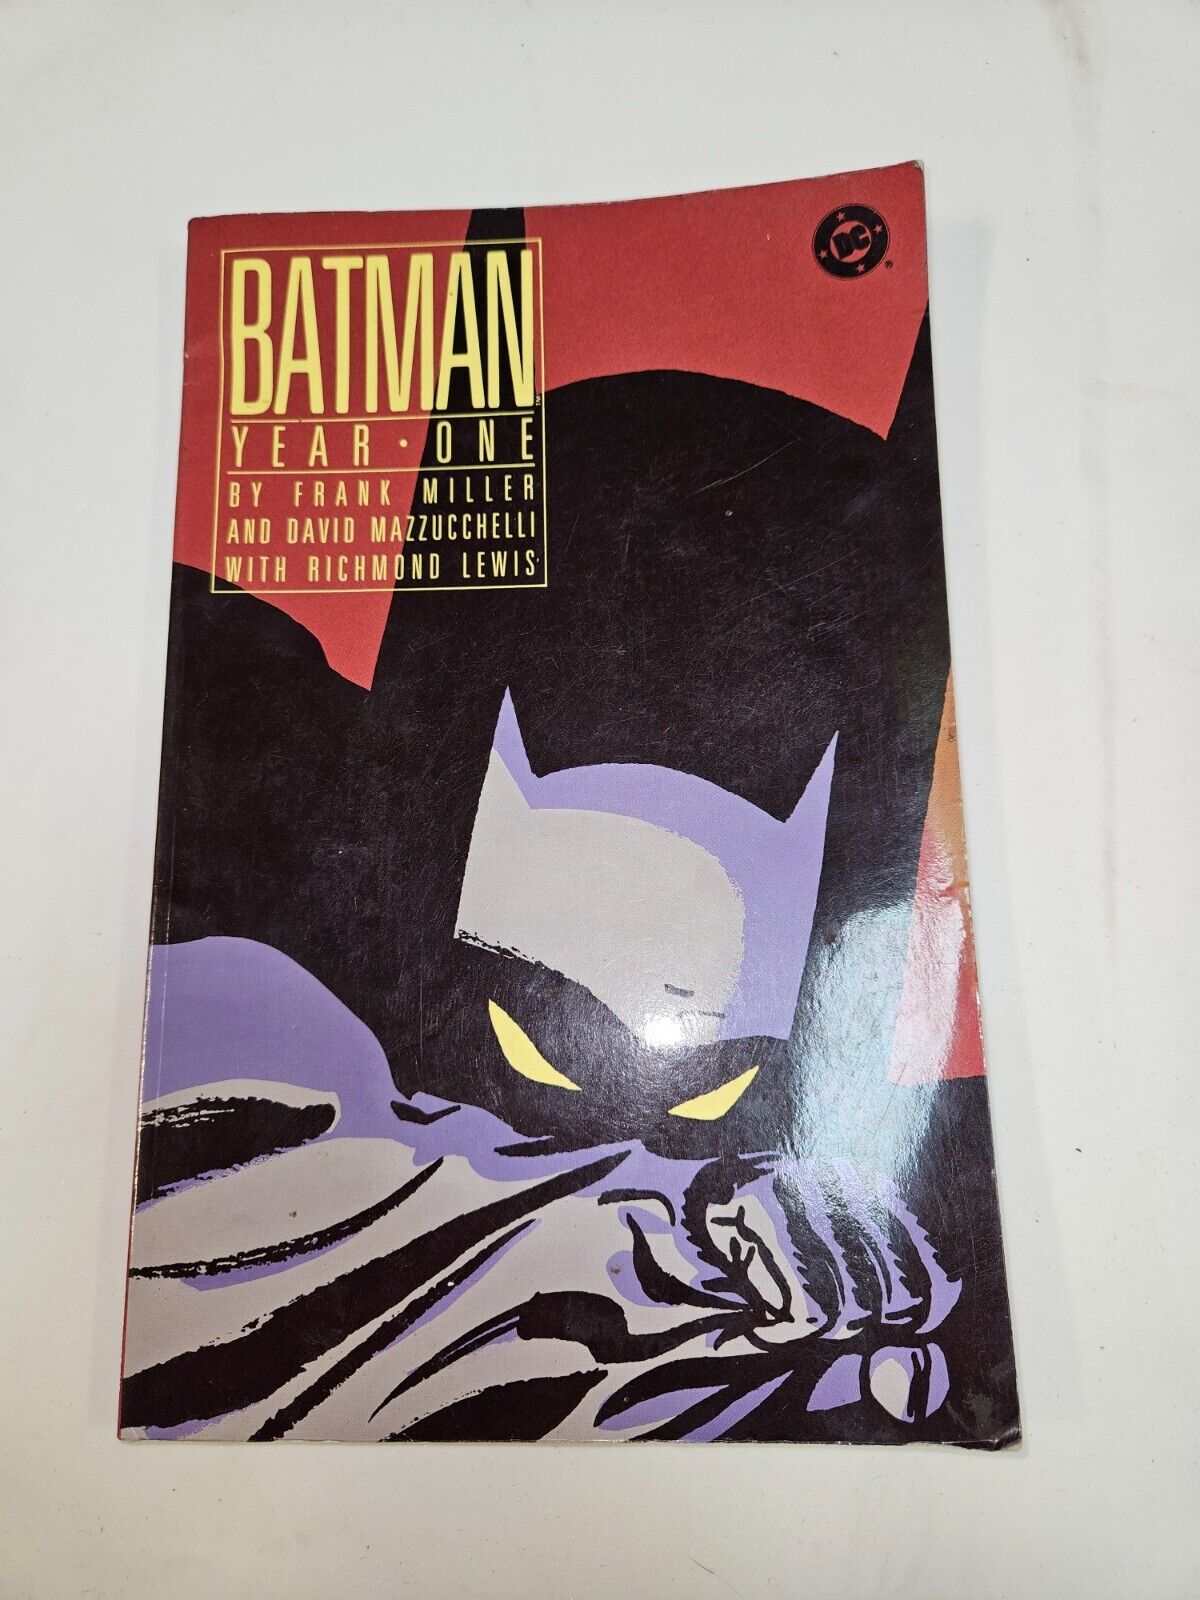 BATMAN YEAR ONE BOOK  acceptable condition Published in 1988